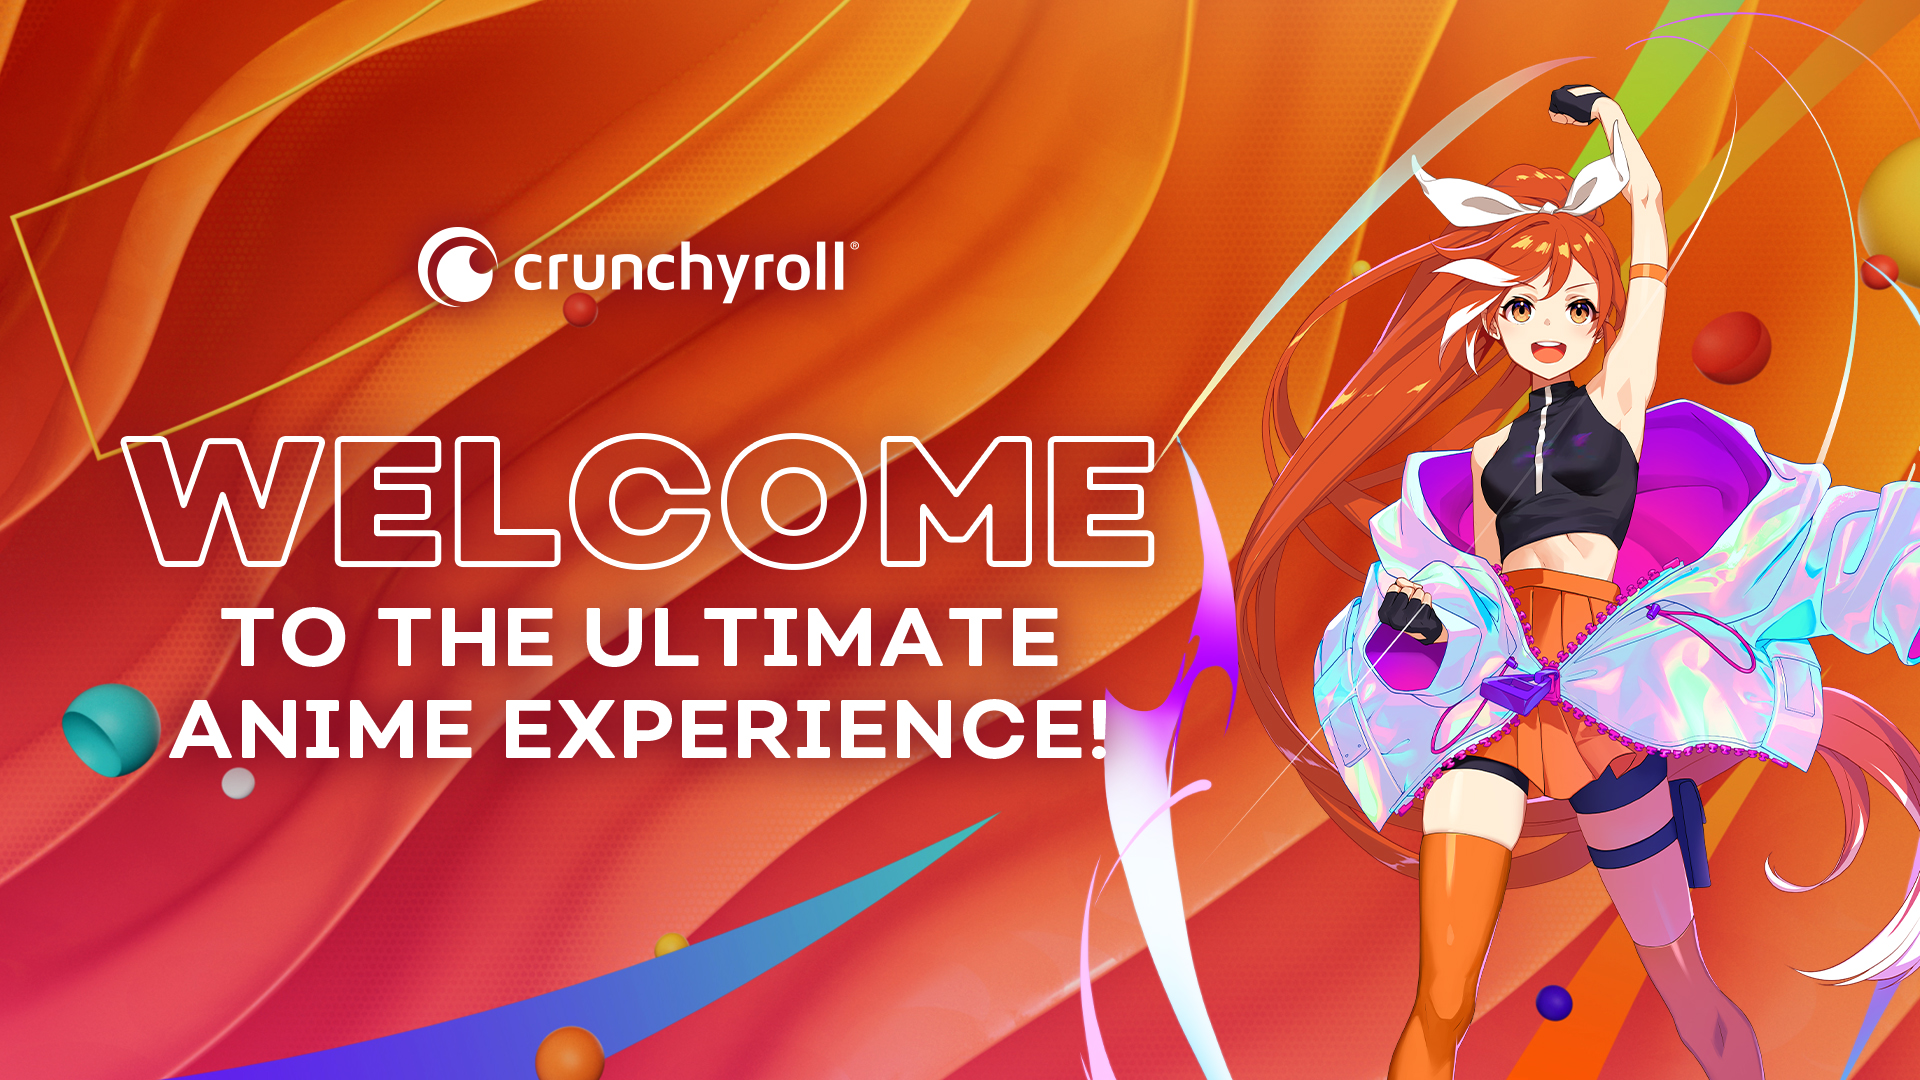 The Crunchyroll-Funimation merger is proof that niche video is